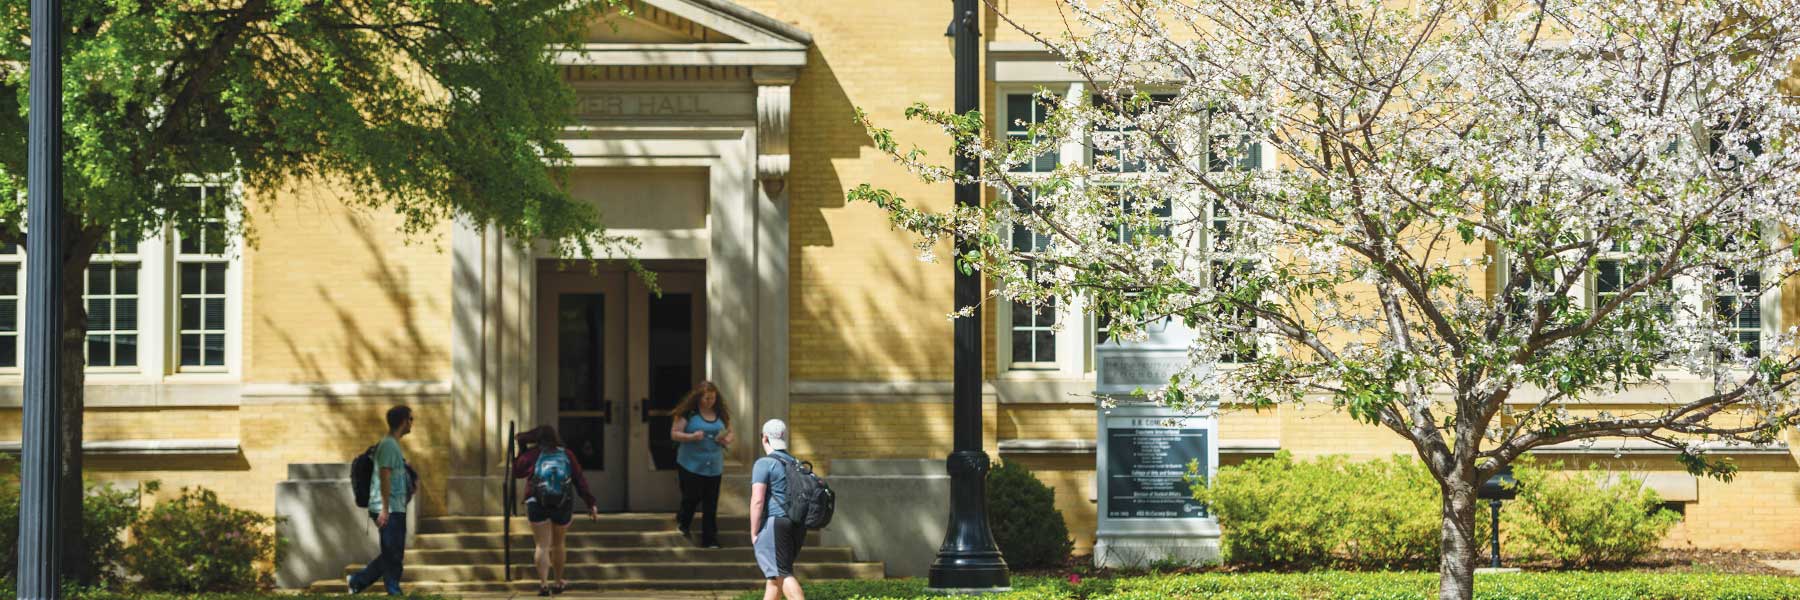 students walking in front of BB Comer Hall, home of the Modern Languages department